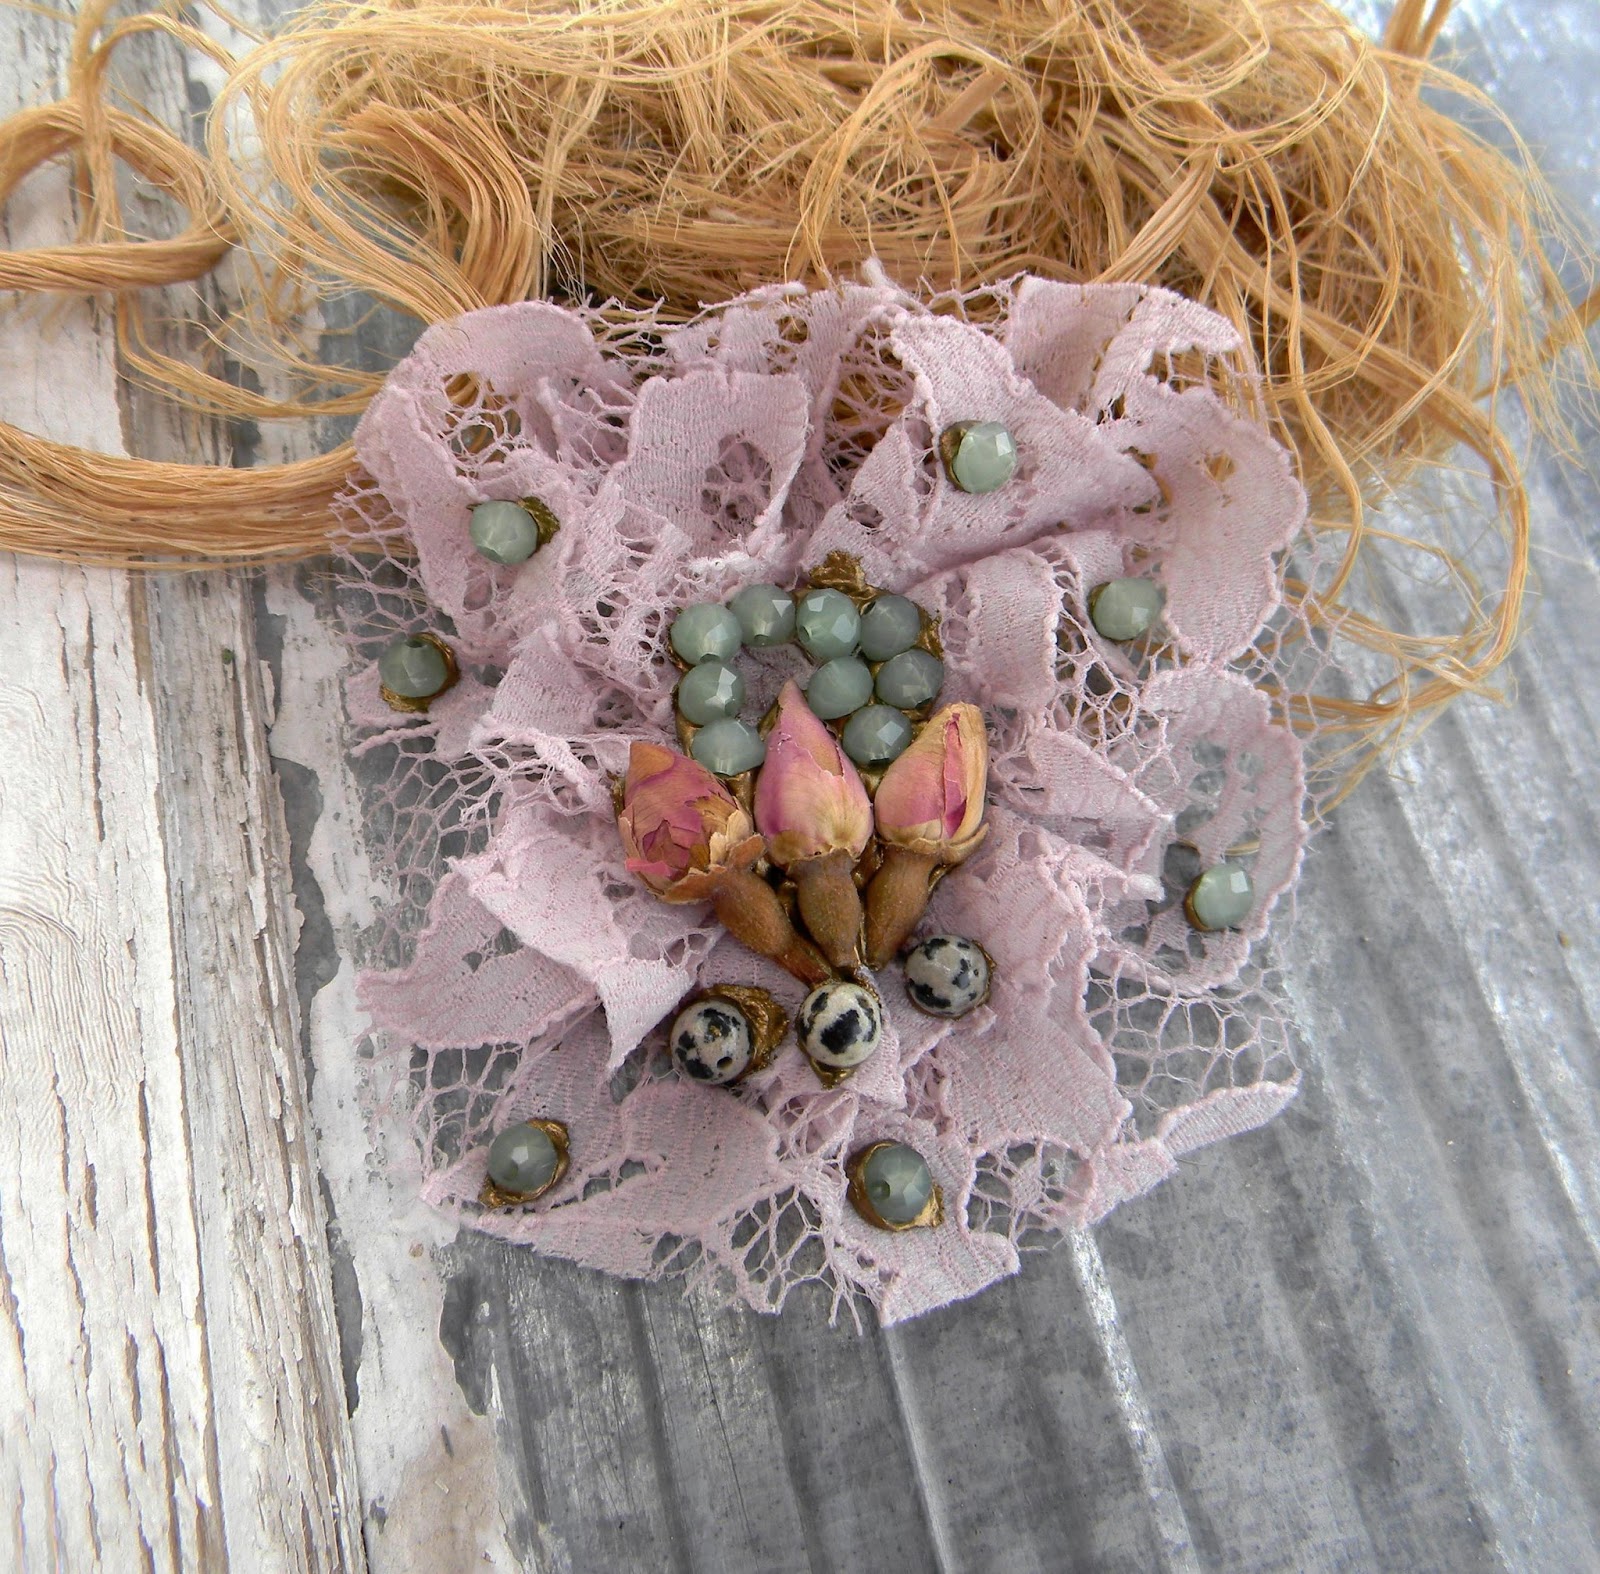 Unique Handcrfated Textile Brooch Shabby Eco Chic Inspired